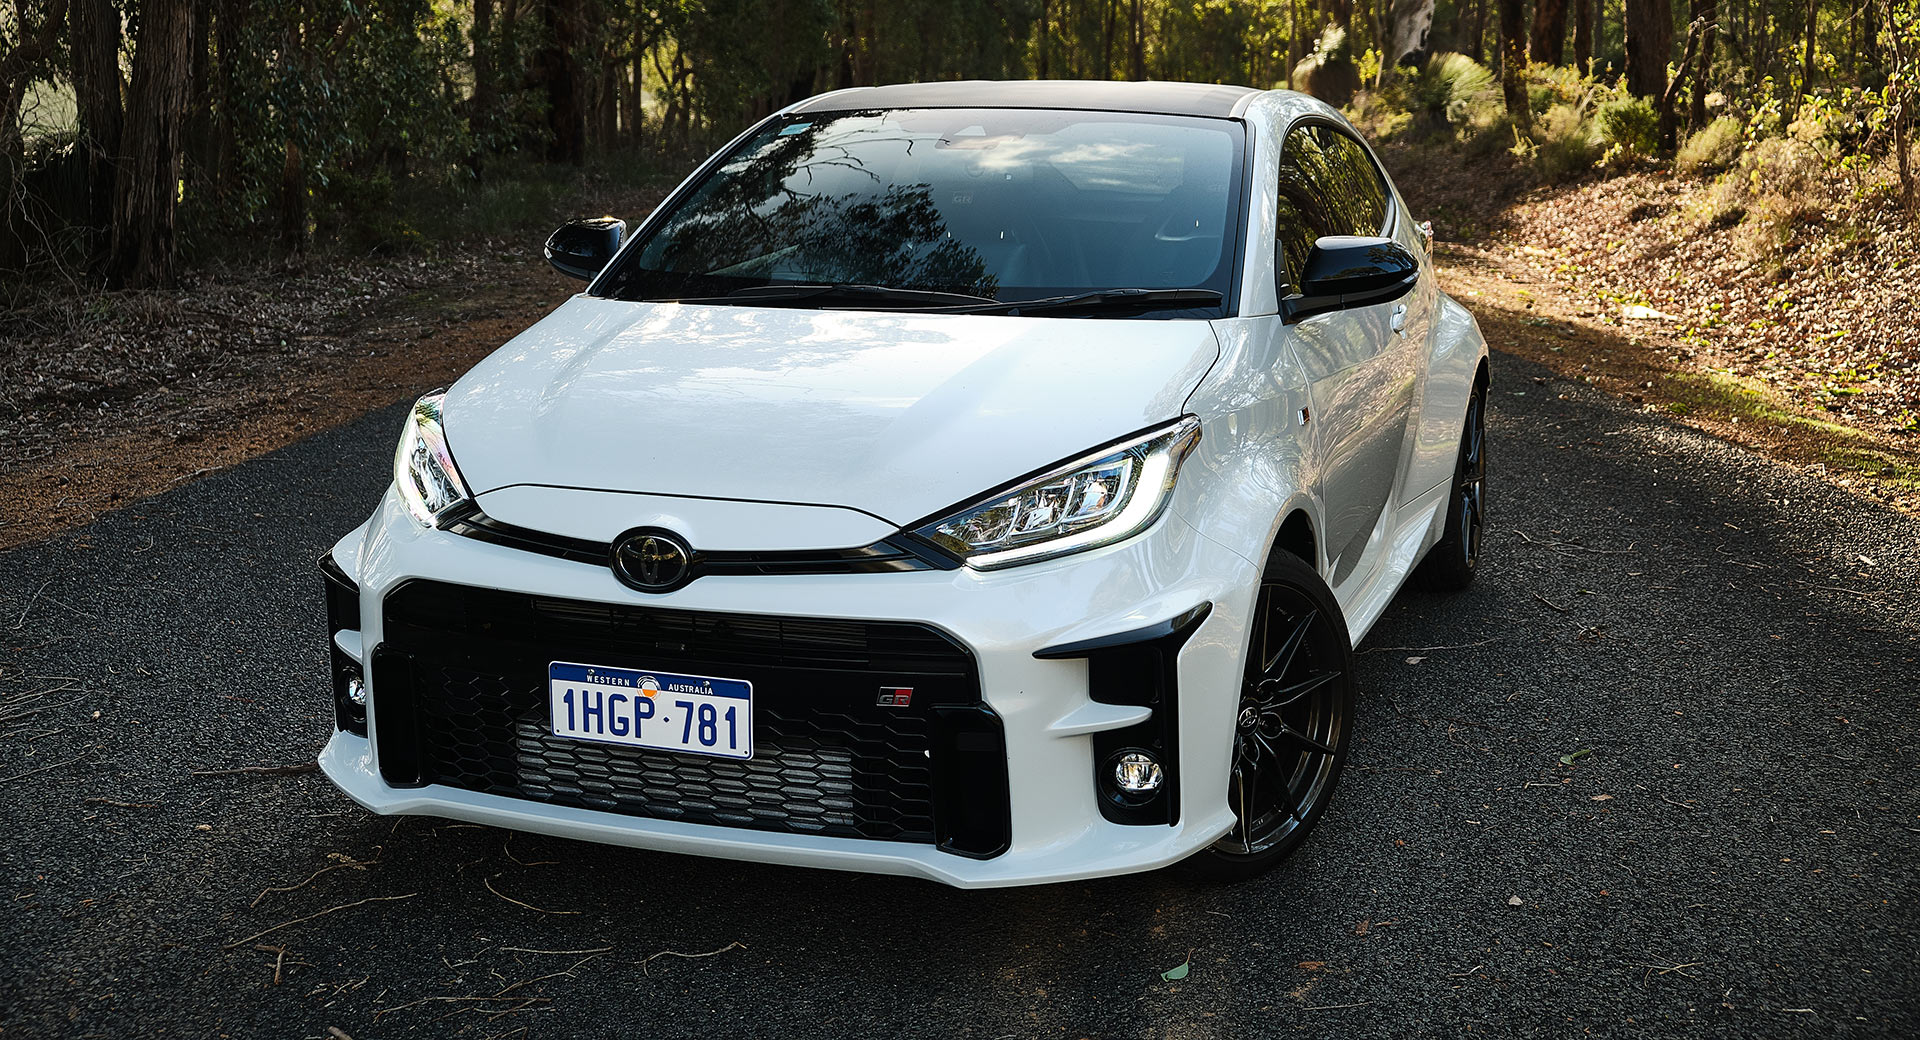 Pushed: 2021 Toyota GR Yaris Rallye Is The One You Ought to Go For Auto Recent